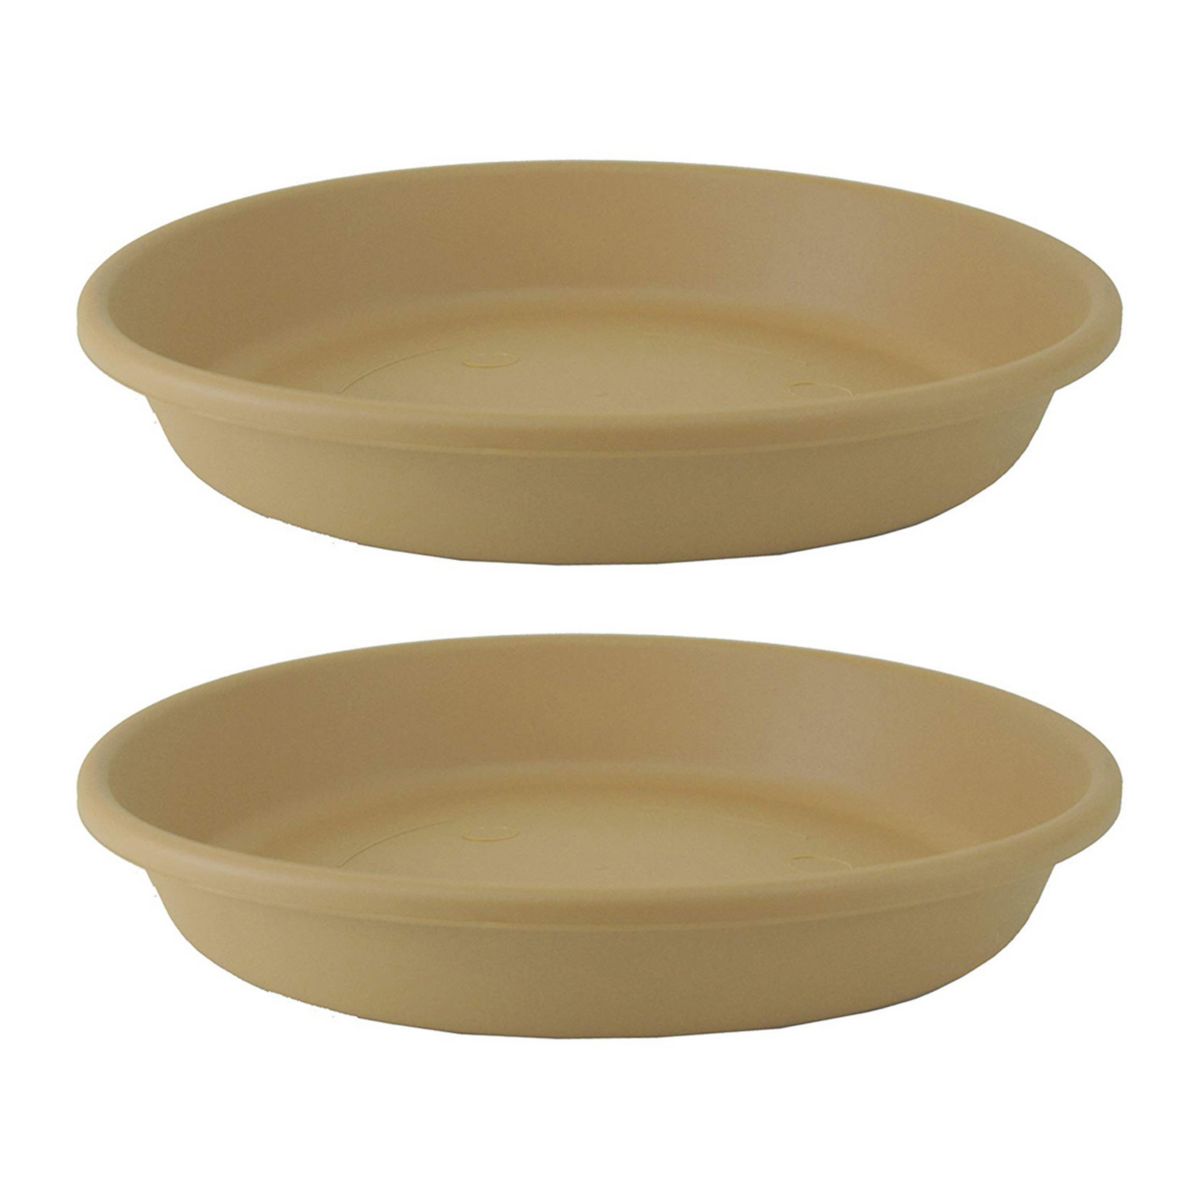 HC Companies Classic 24 Inch Round Flower Pot Plant Saucer, Sandstone (2 Pack) The HC Companies